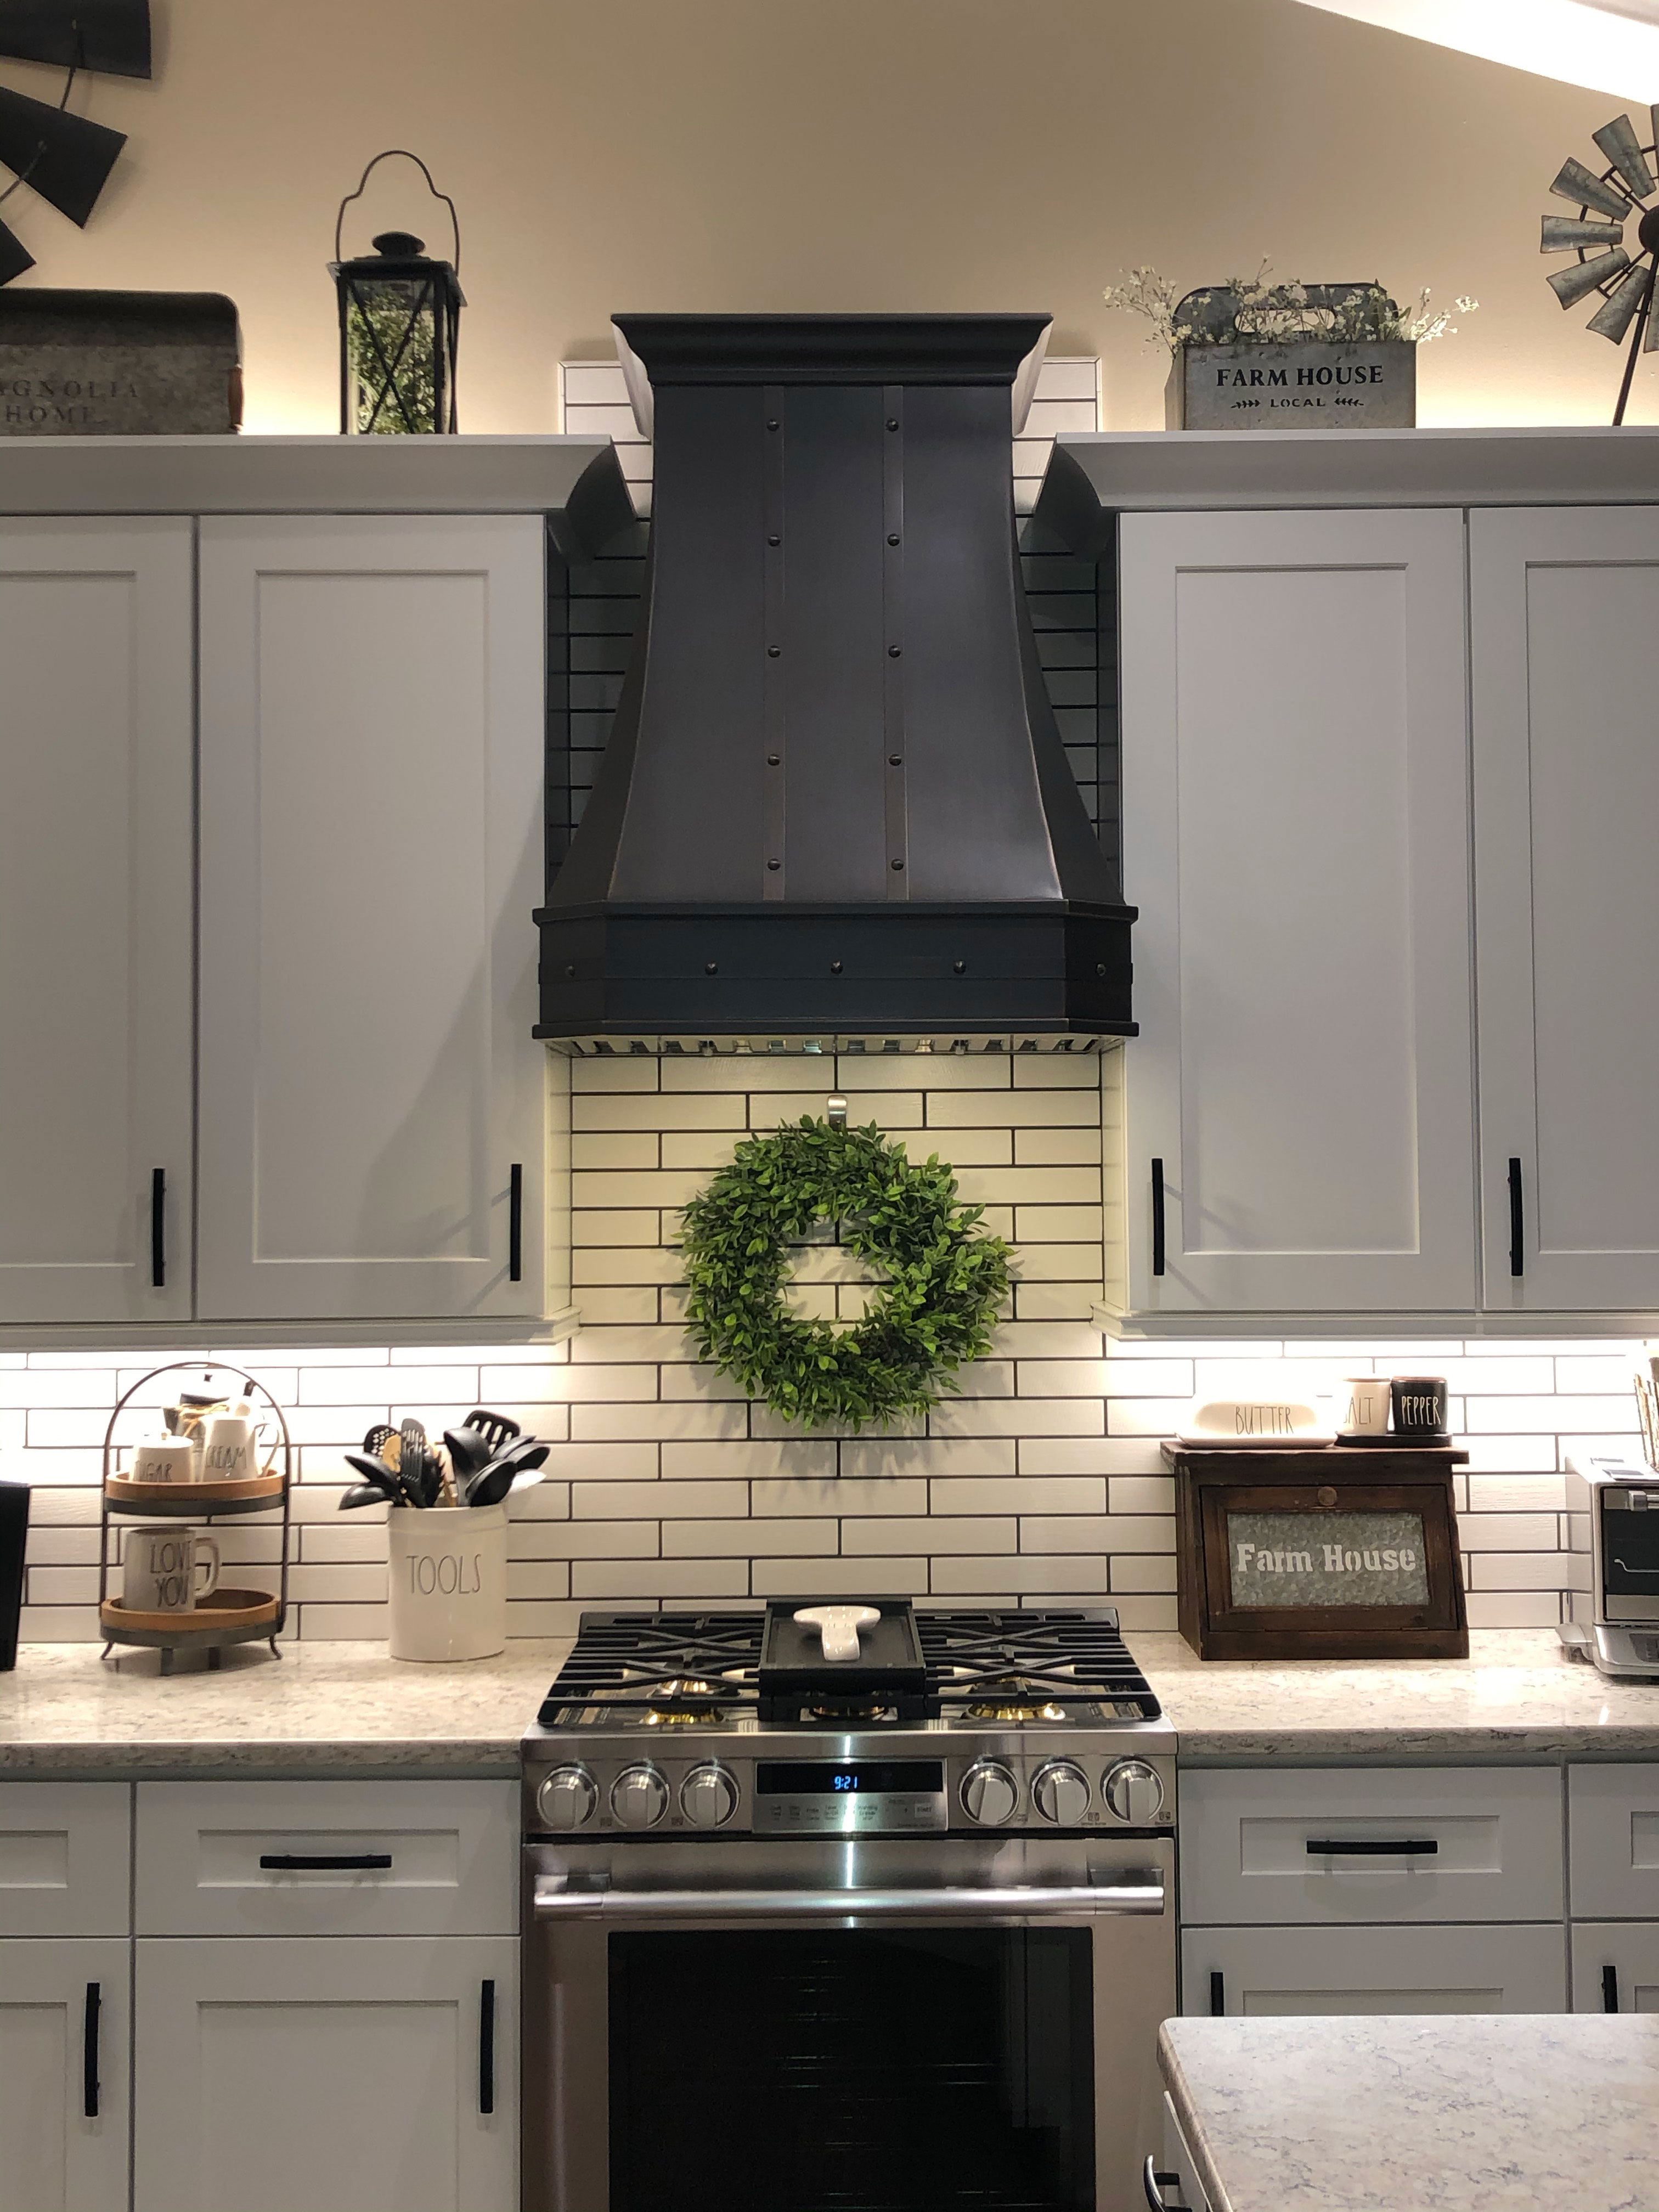 A black copper range hood set above a four burner stove in a rustic kitchen World CopperSmith